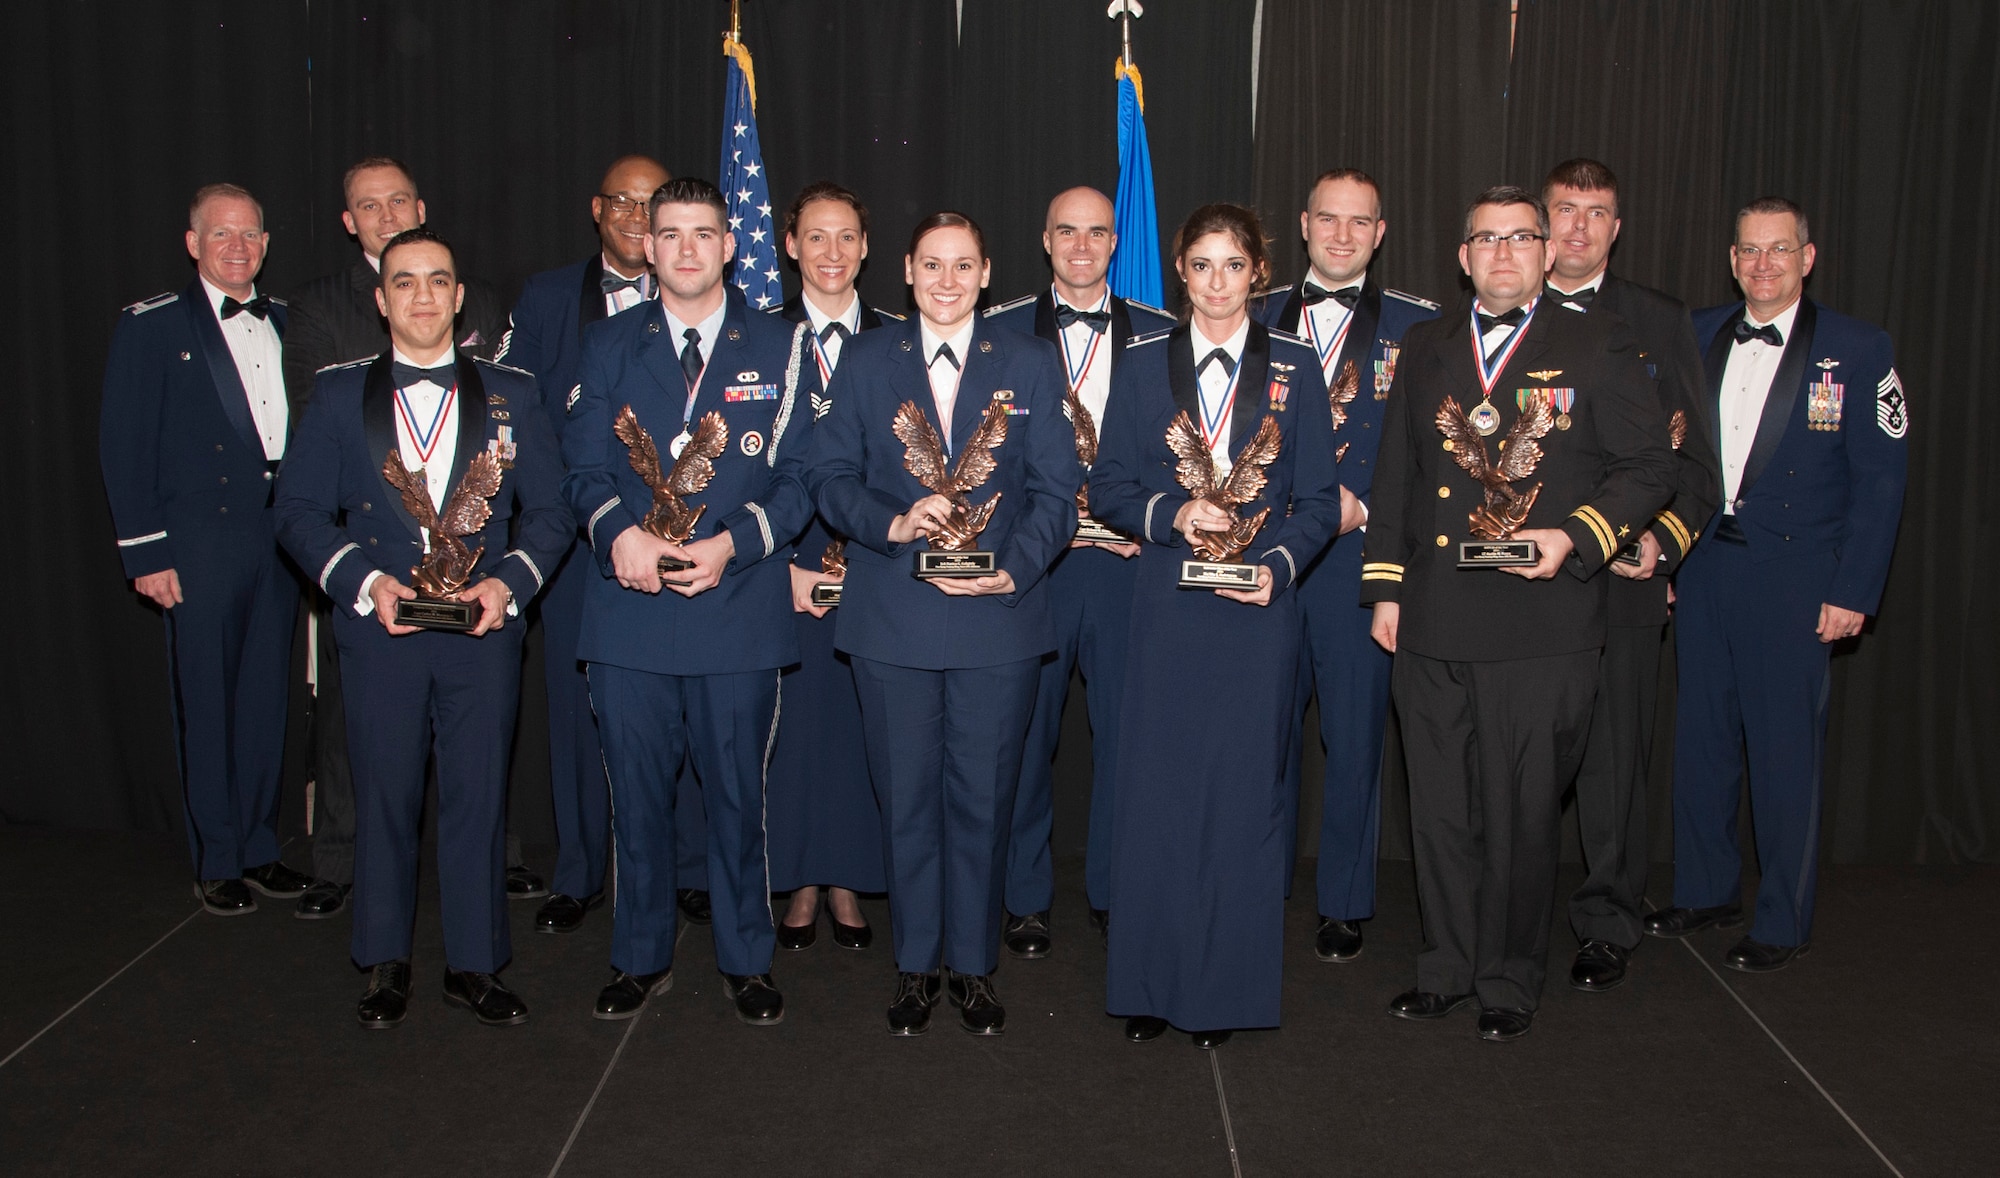 The outstanding Airmen of the 71st Flying Training Wing were recognized during the 2016 Annual Awards banquet Feb. 17 at the Vance Collocated Club. Front row from left: Capt. Carlos M. Moralejo Jr., Senior Airman Chase Kelly, Senior Airman Danica G. Golightly, 1st Lt. Mia E. Gwirtsman and Navy Lt. Austin M. Nasca. Back row from left: Col. Darrell Judy, 71st FTW commander, David M. Harris, Master Sgt. Richard A. Parks, Maj. Megan S. Brandt, Capt. Richard M. Kirwan Jr., Capt. Jeffrey M. Kelley, Navy Lt. Michael B. Gawne and Chief Master Sgt. Jeffrey Wilson, 71st FTW command chief. (U.S. Air Force photo/ Tech. Sgt. James Bolinger)